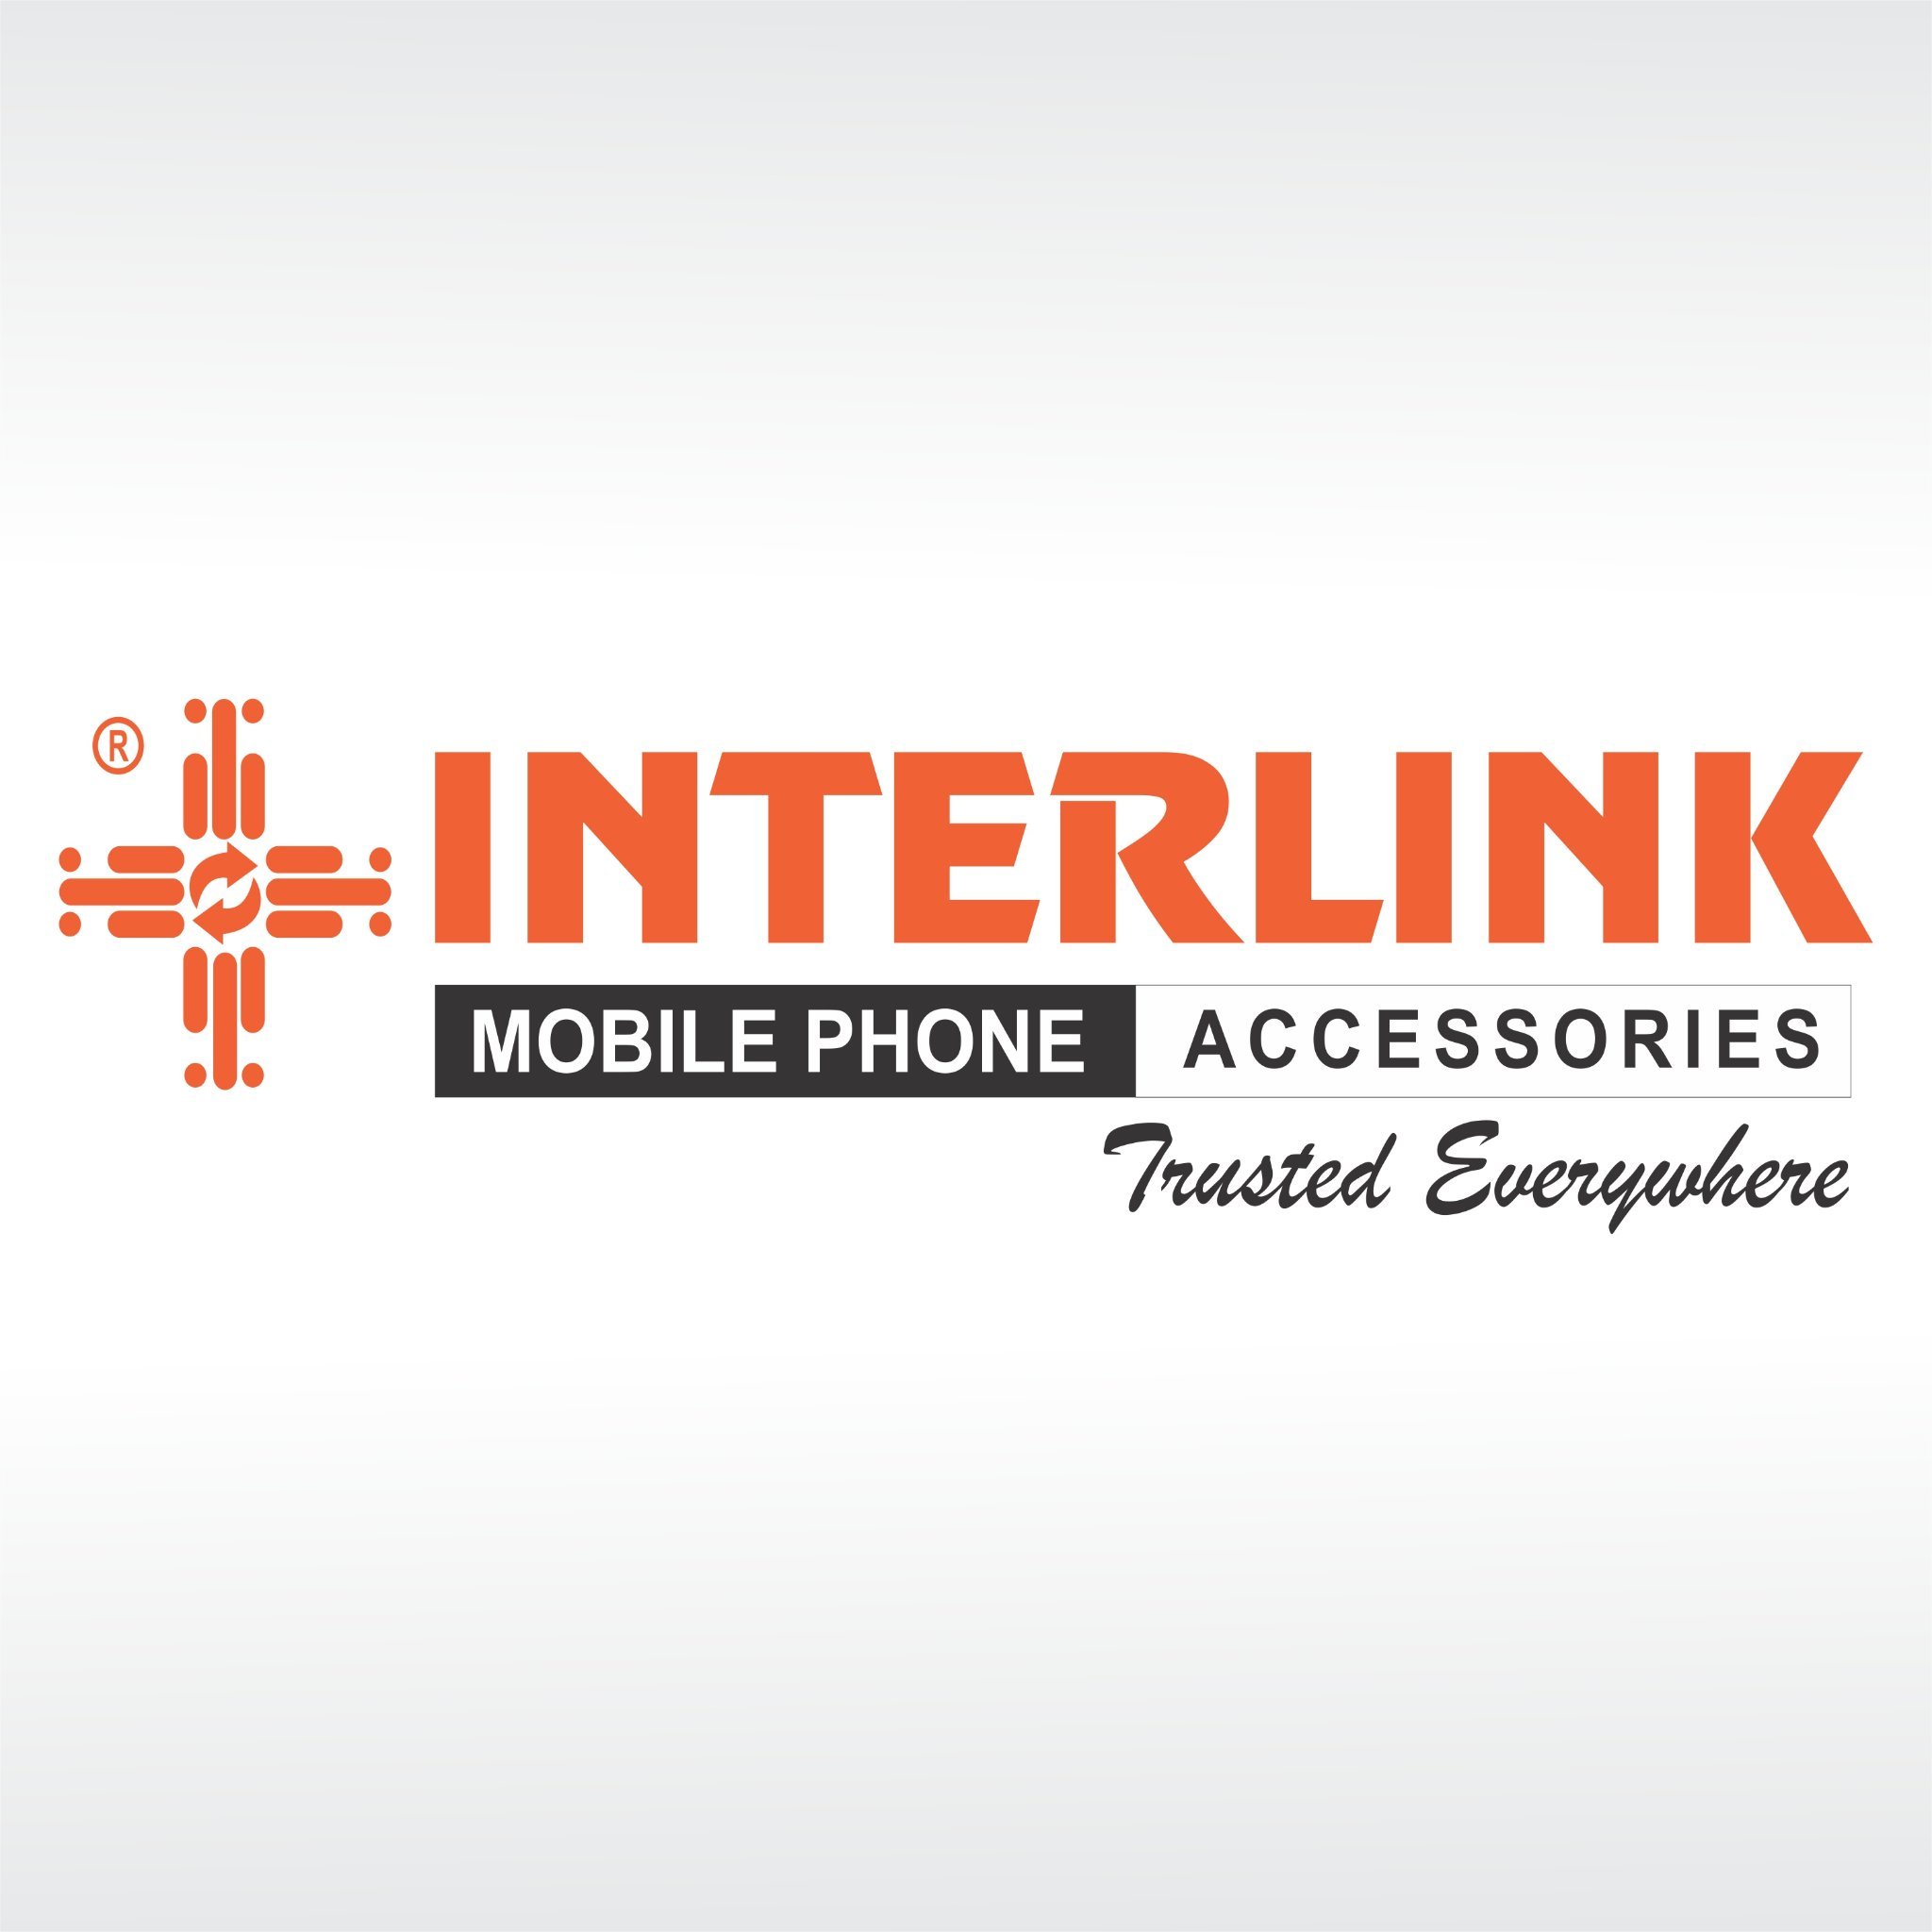 INTERLINK was Founded in 1998, with its headquarters in Guangzhou China. Today, INTERLINK has become a leading global brand of Mobile phone accessories.